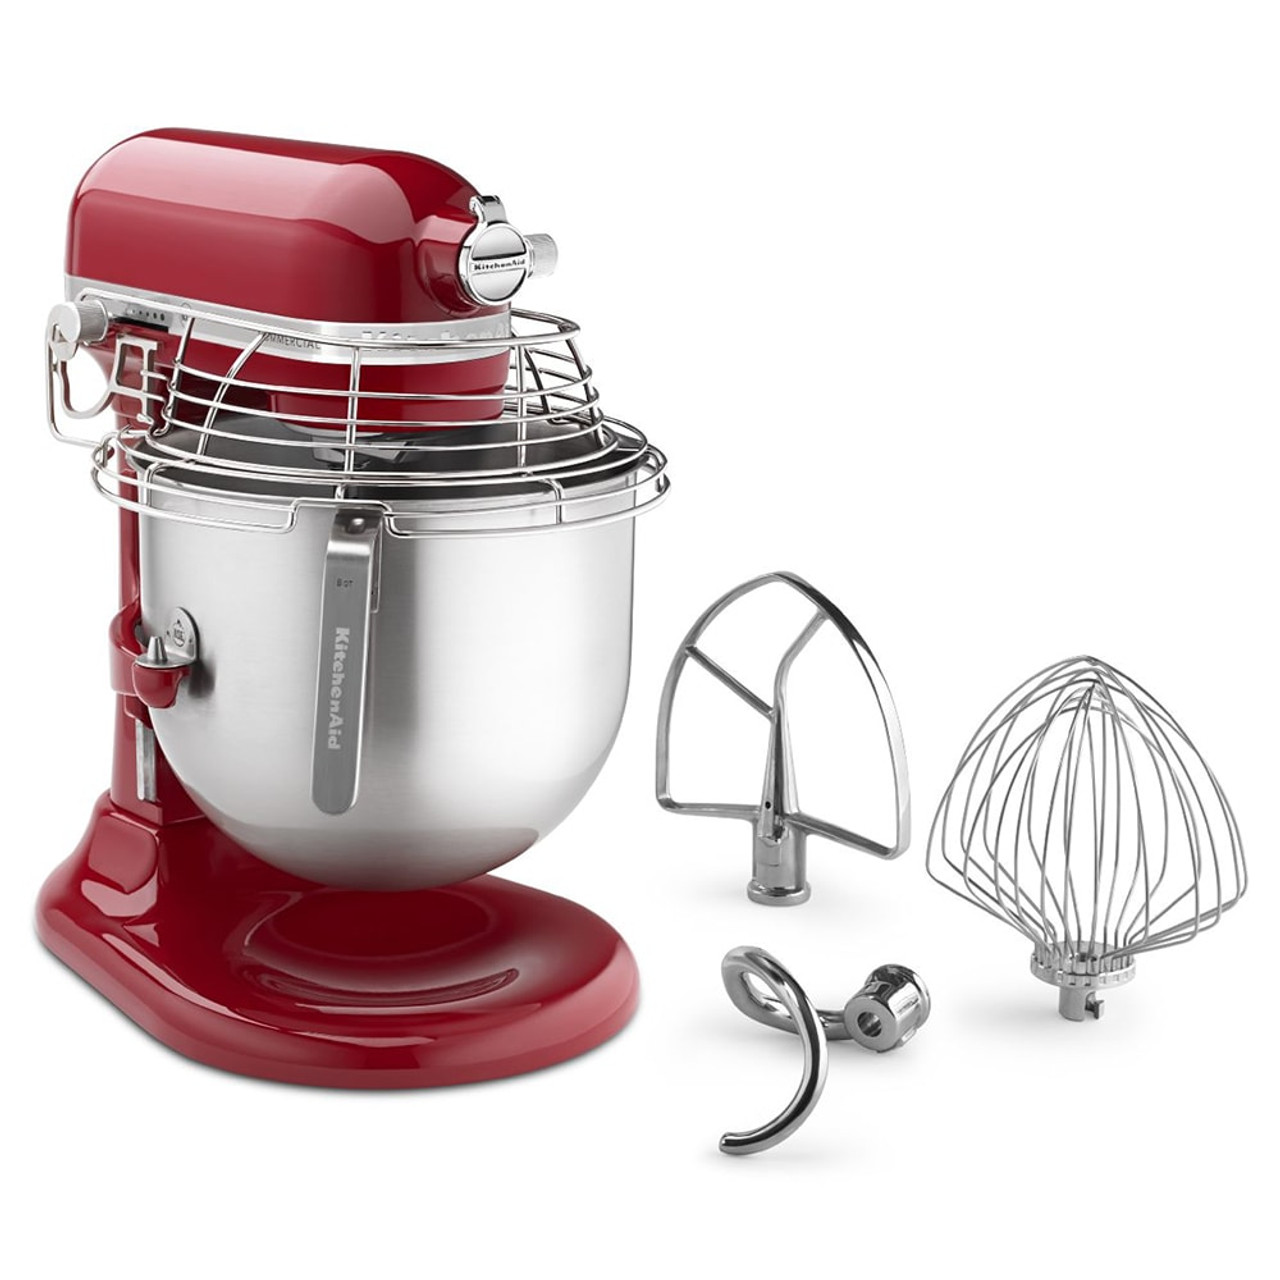  KitchenAid KSMPB7SSC Stainless Steel Pastry Beater Attachment  for Commercial 8-Quart Bowl-Lift Stand Mixers (KSM8990 & KSMC895) : Home &  Kitchen